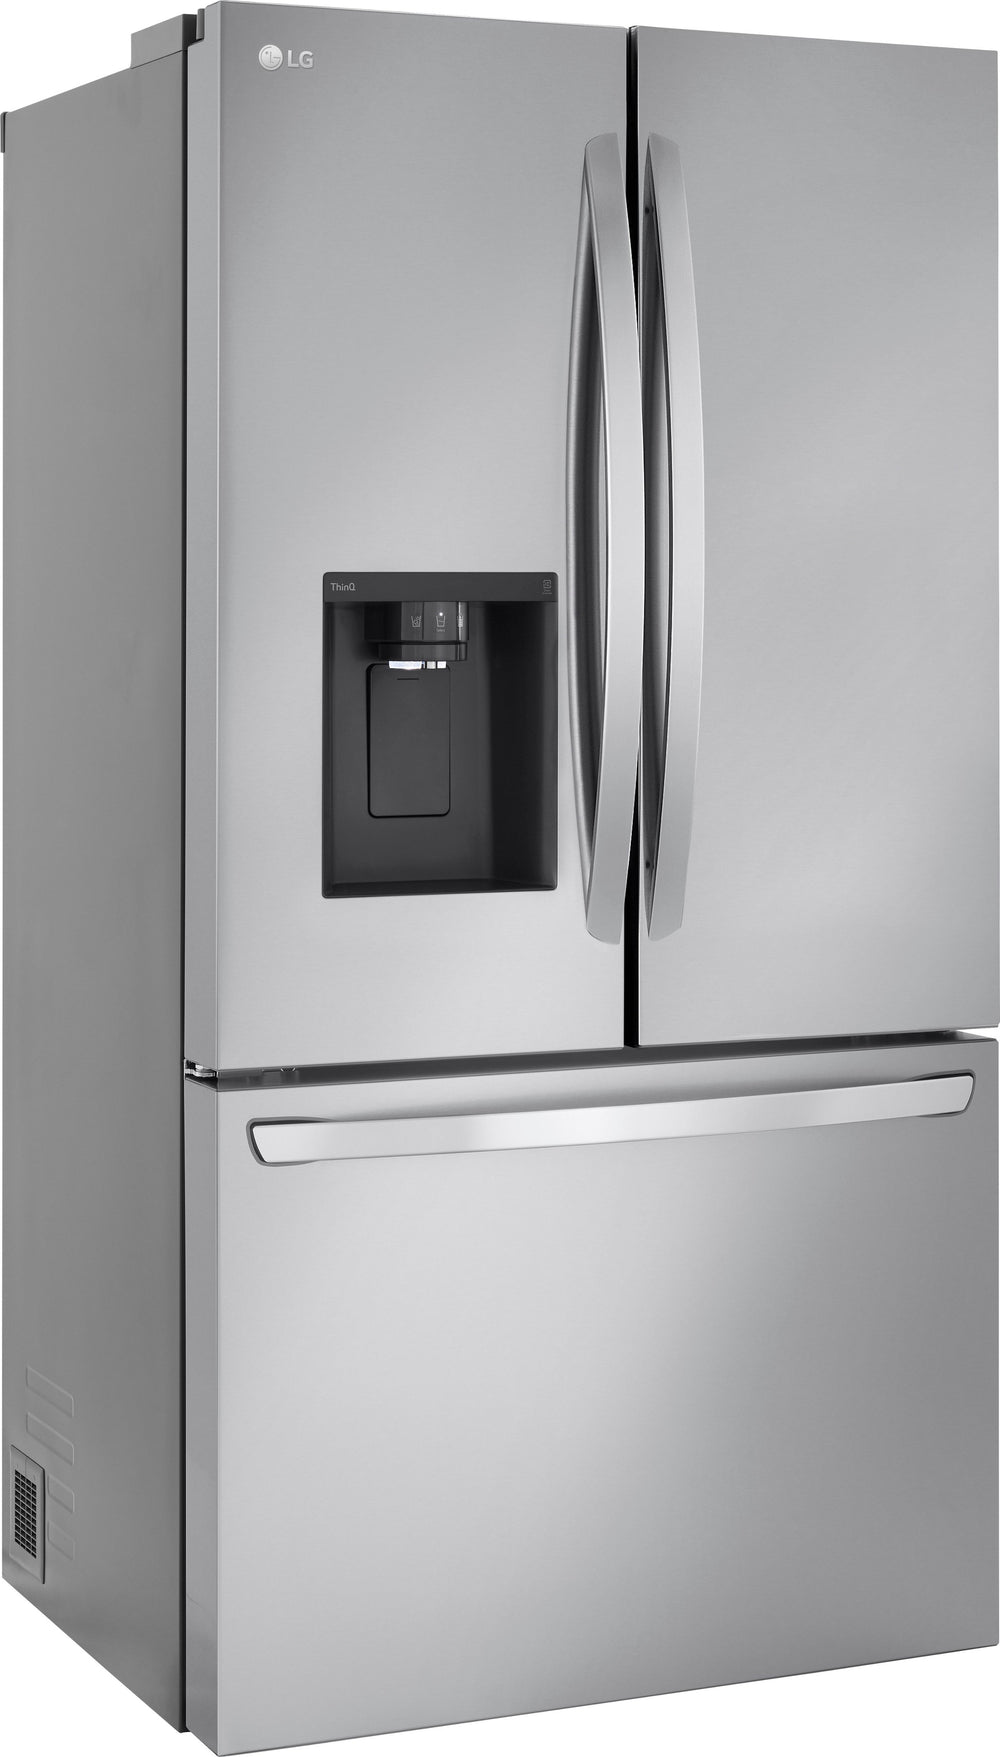 LG - 25.5 Cu. Ft. French Door Counter-Depth Smart Refrigerator with Dual Ice - Stainless steel_1